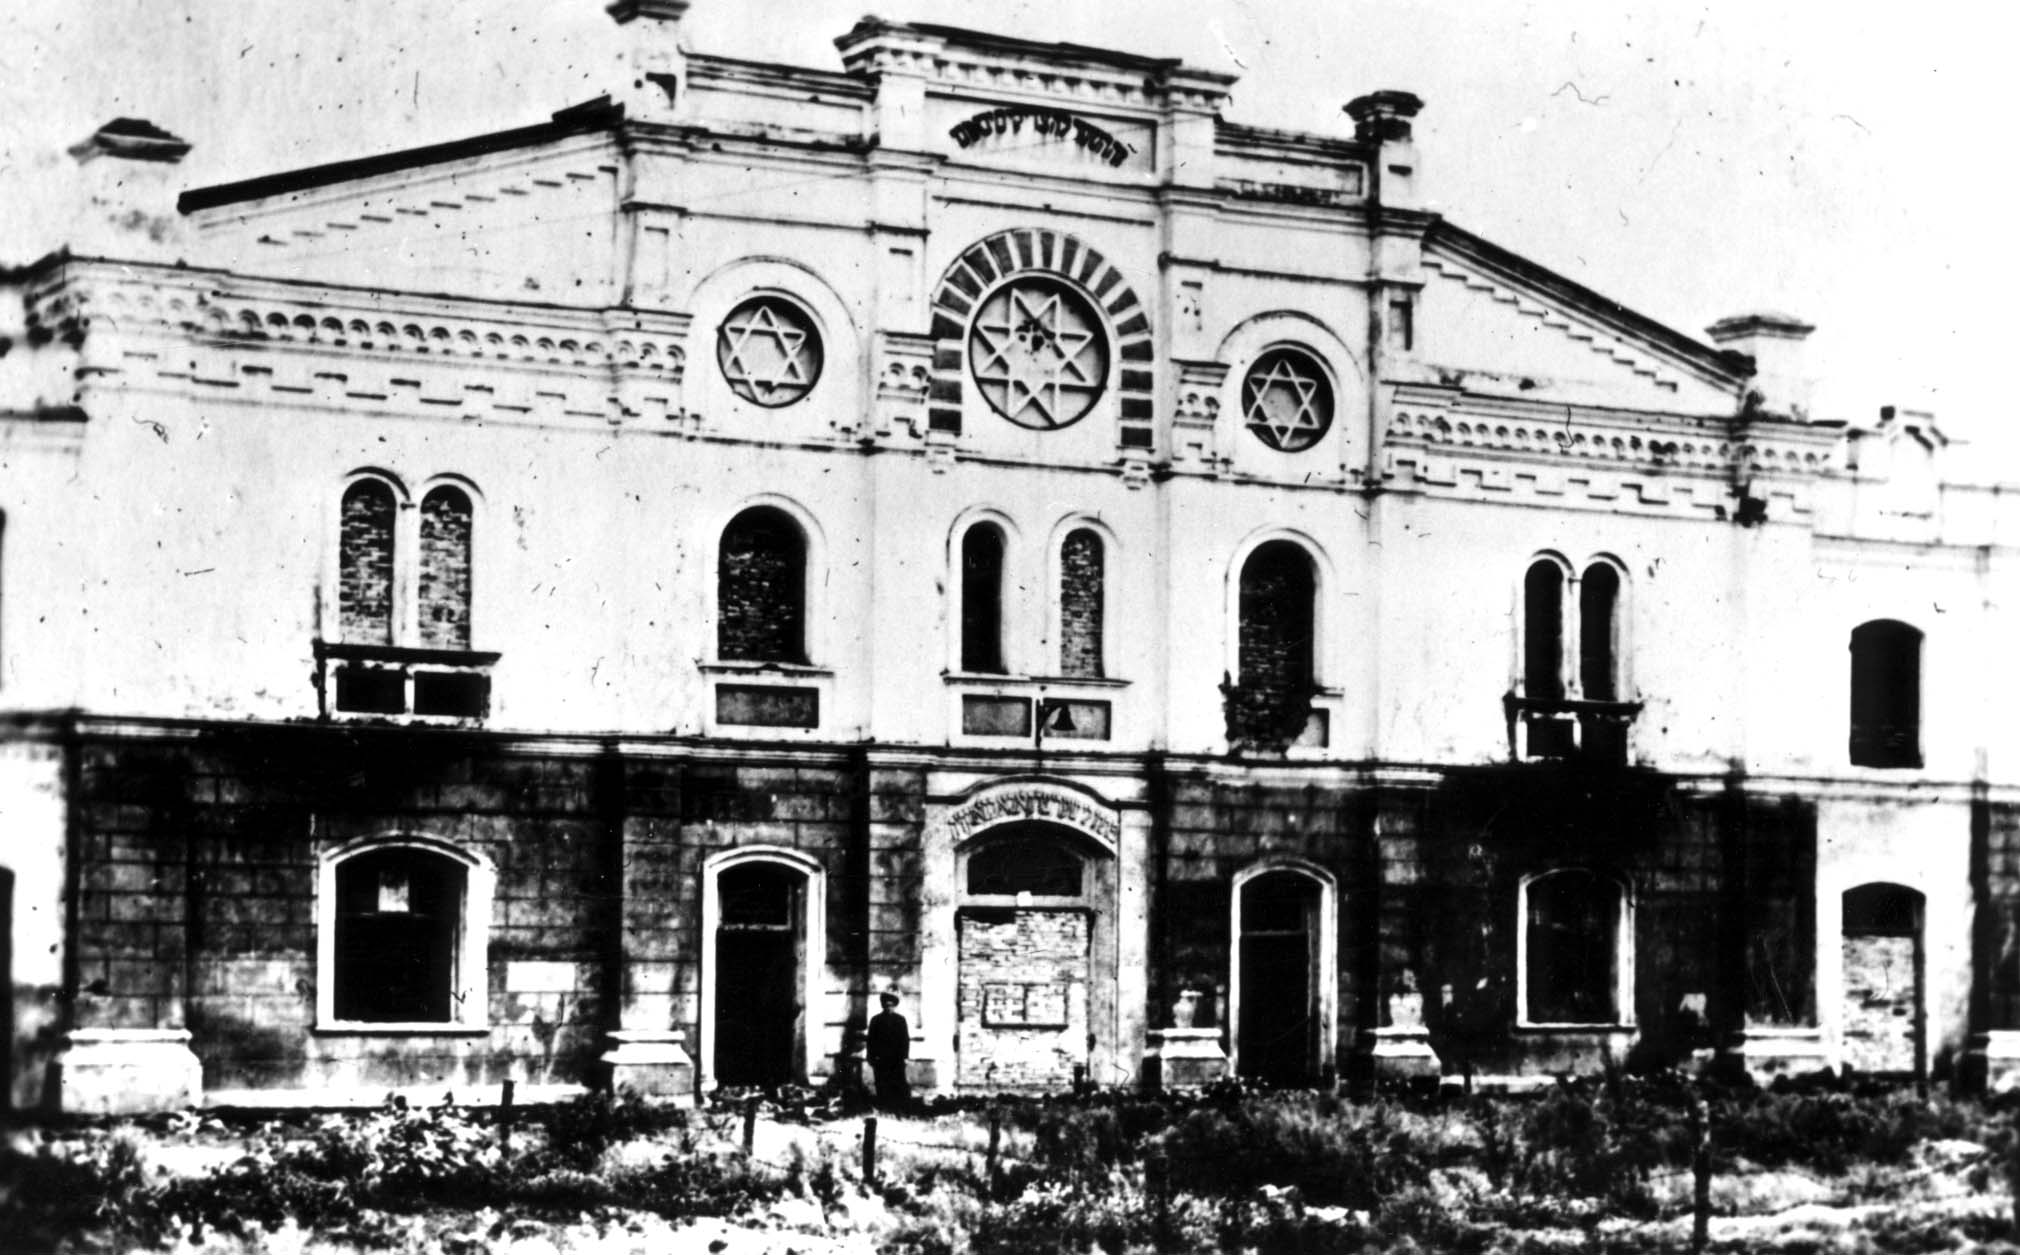 Great Synagogue of Kowel shortly after the liberation of the city by the Red Army